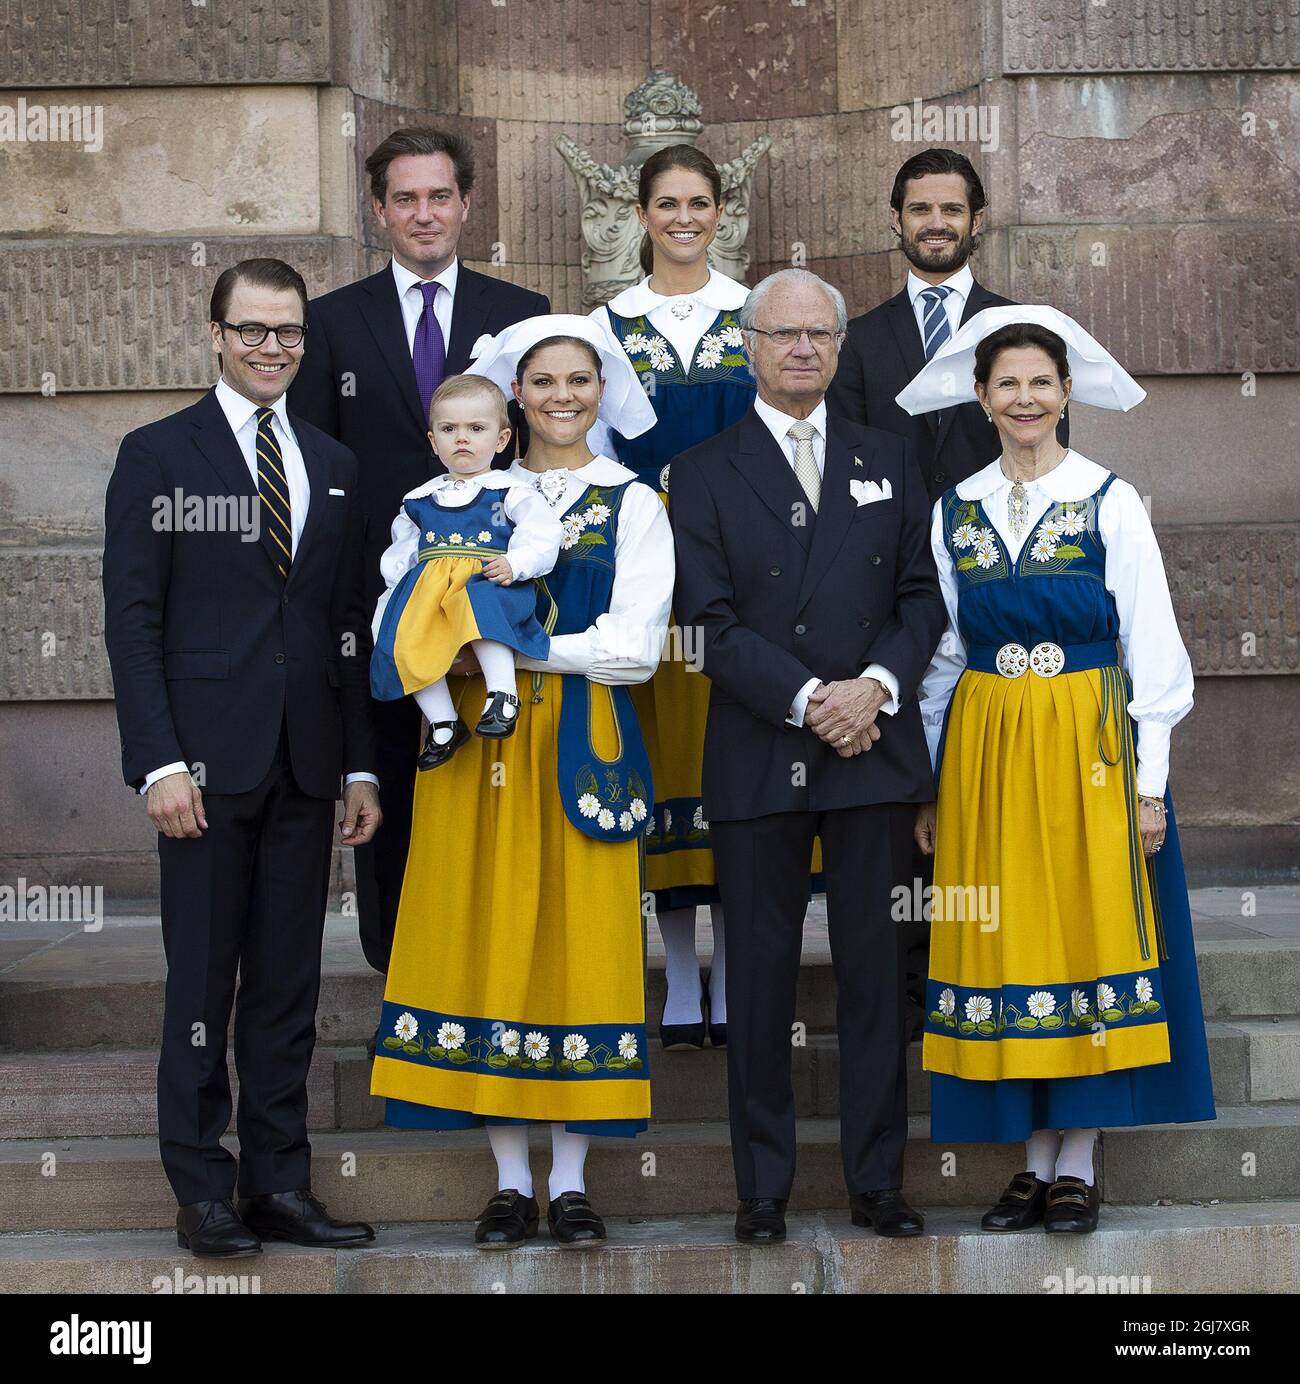 Family photo of L-R: Prince Daniel, Christopher O'Neill, Princess Estelle, Crown Princess Victoria, Princess Madeleine, King Carl Gustaf, Prince Carl Philip and Queen Silvia during the Swedish National Day celebrations at the Royal Palace in Stockholm, Sweden, June 6, 2013.    Stock Photo